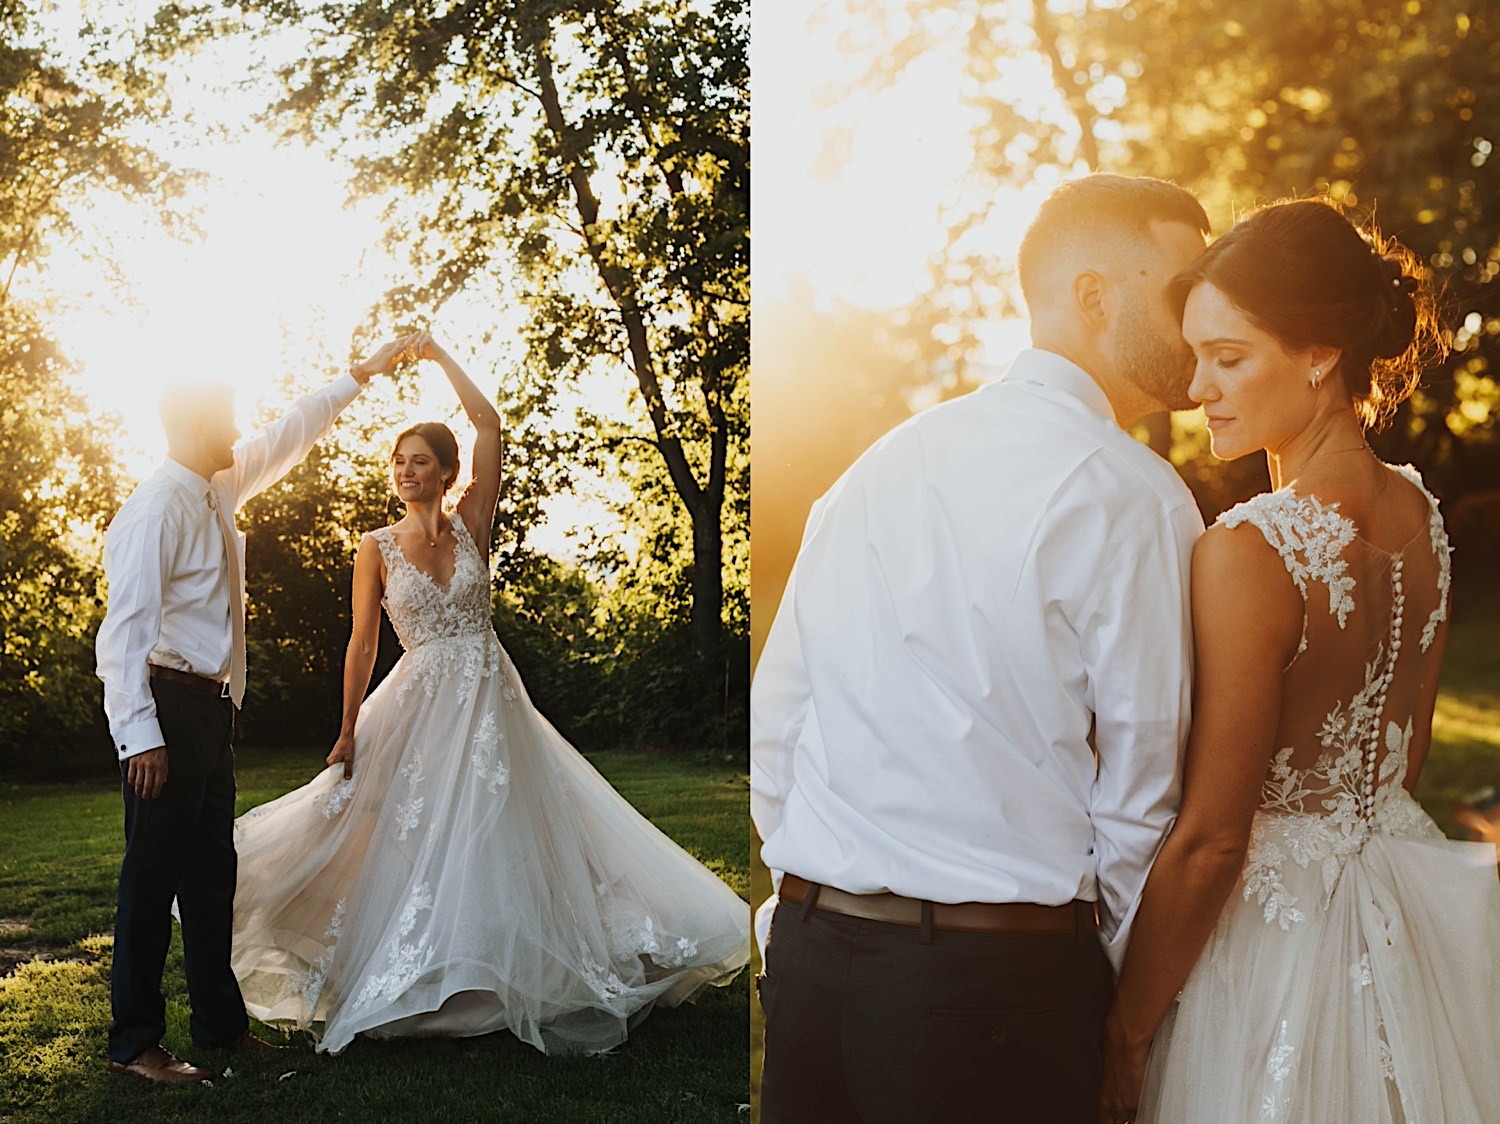 2 photos side by side, the left is of a bride and groom dancing outside at sunset, the right is of the groom kissing the bride's cheek while outside at sunset